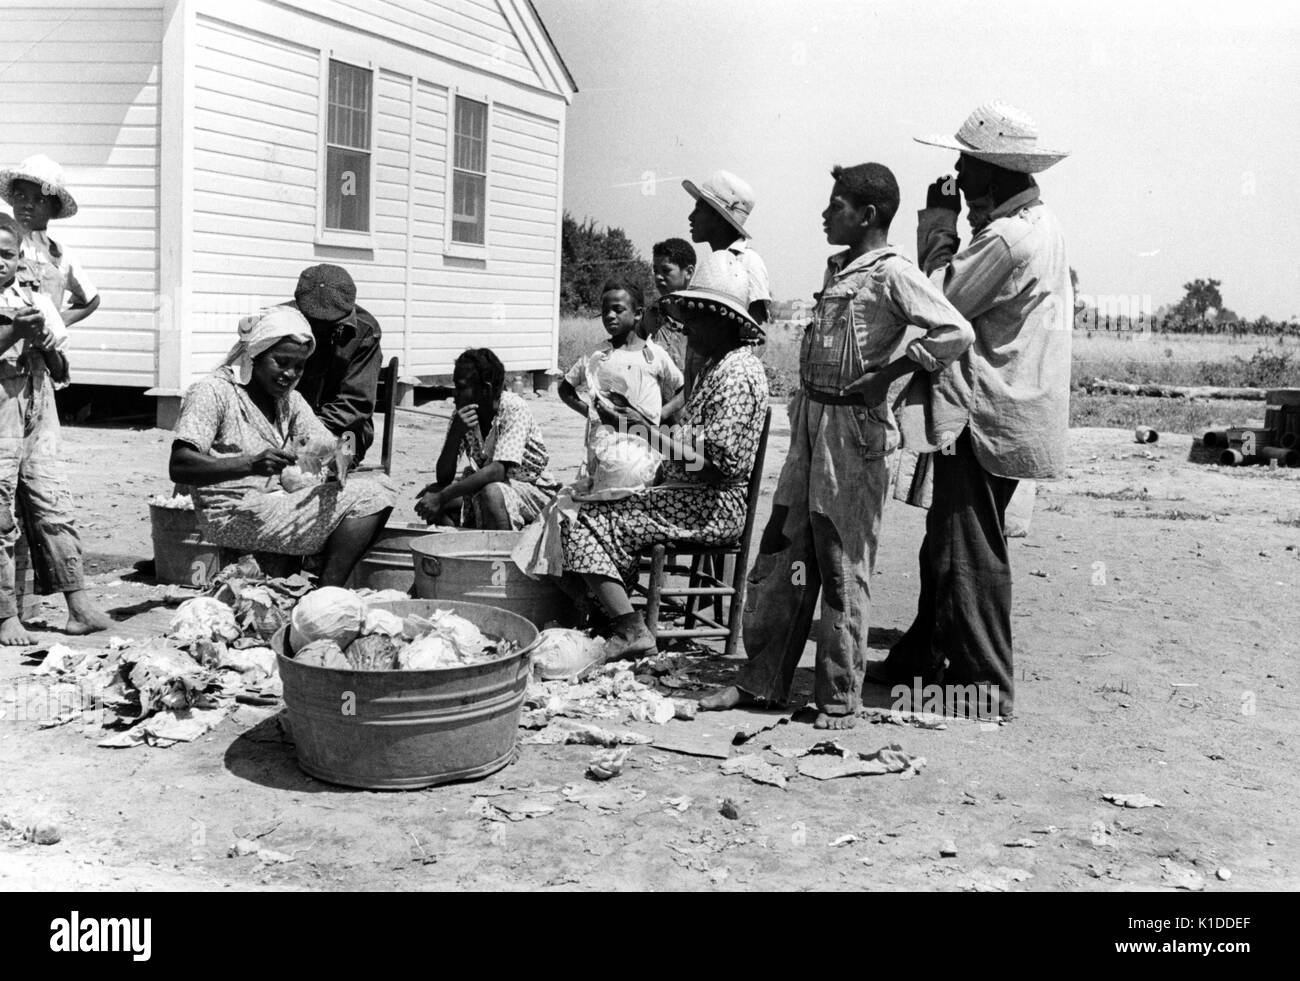 Southeast Missouri Farms Family of African-American Farm Security Administration clients shredding cabbage, 1938. From the New York Public Library. Stock Photo